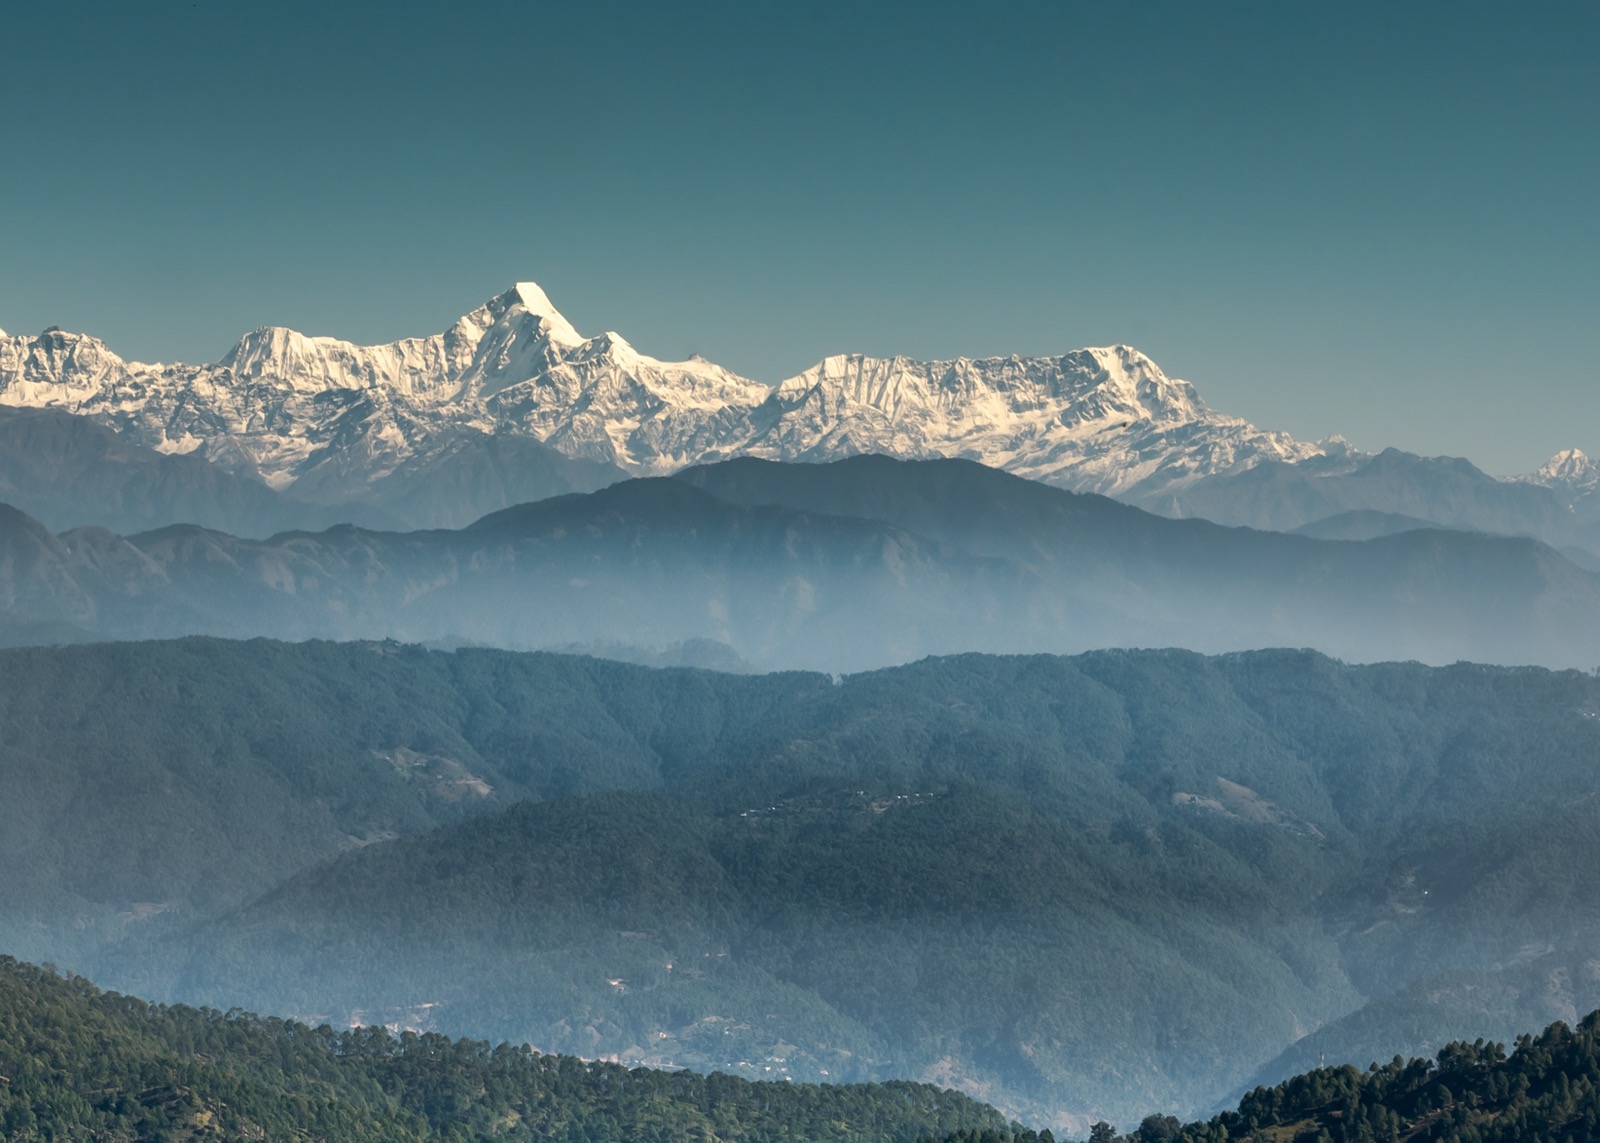 Landscape view of the Himalayan mountain ranges on a clear sky background